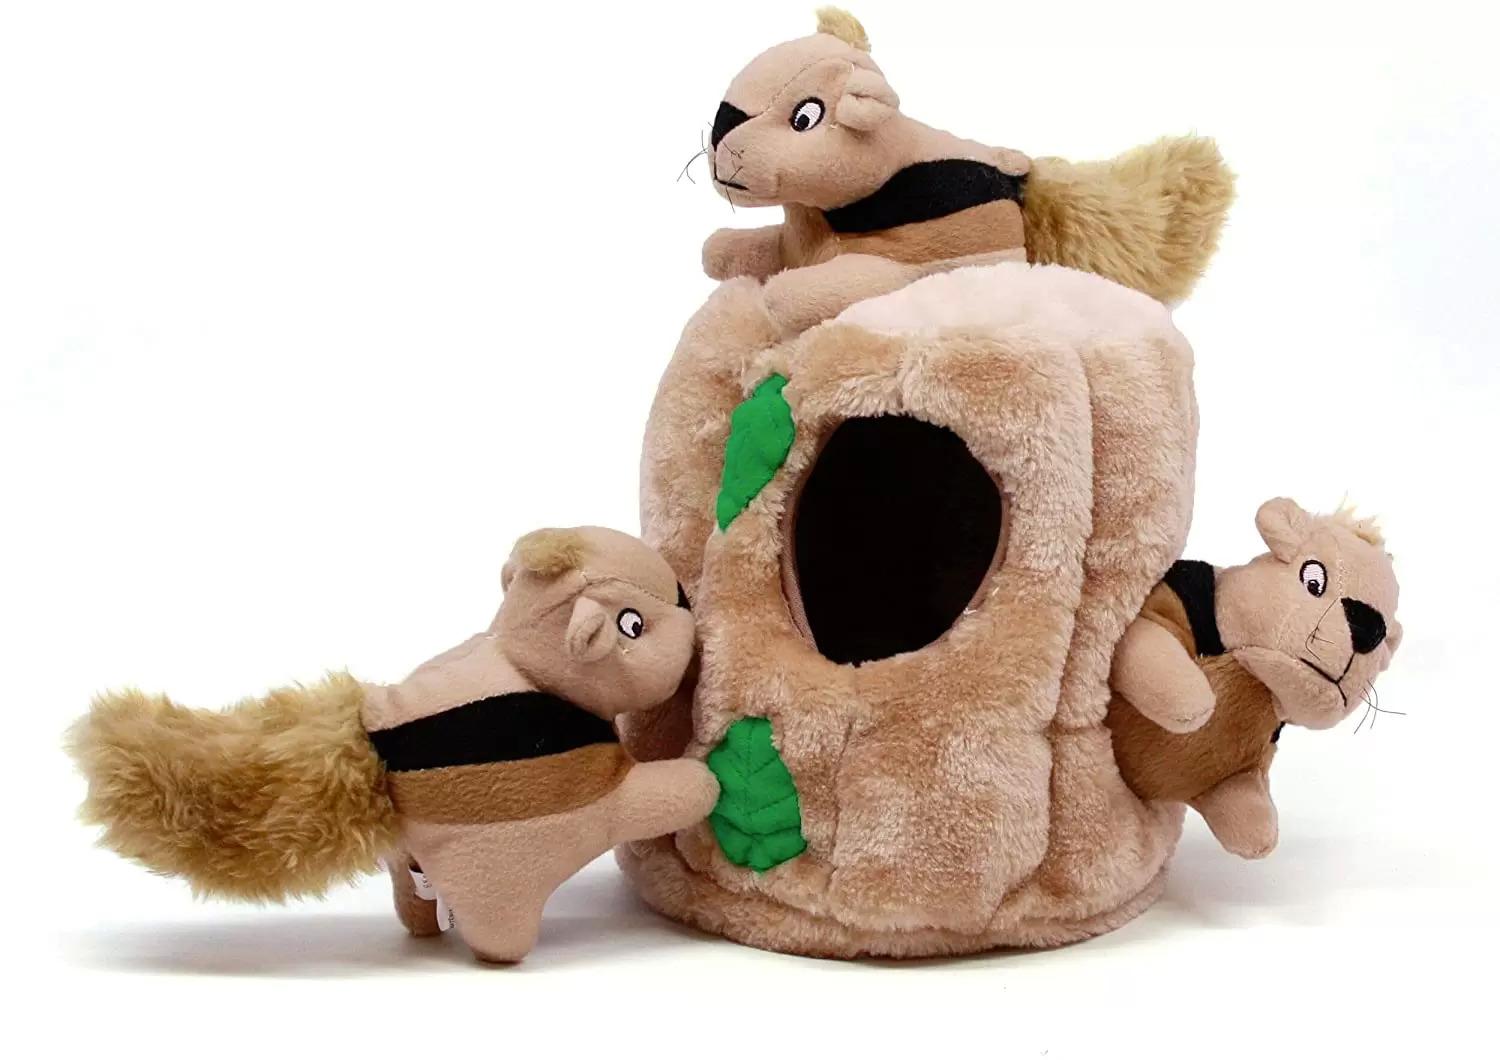 Outward Hound Hide-A-Squirrel Squeaky Puzzle Plush Dog Toy for $5.10 Shipped